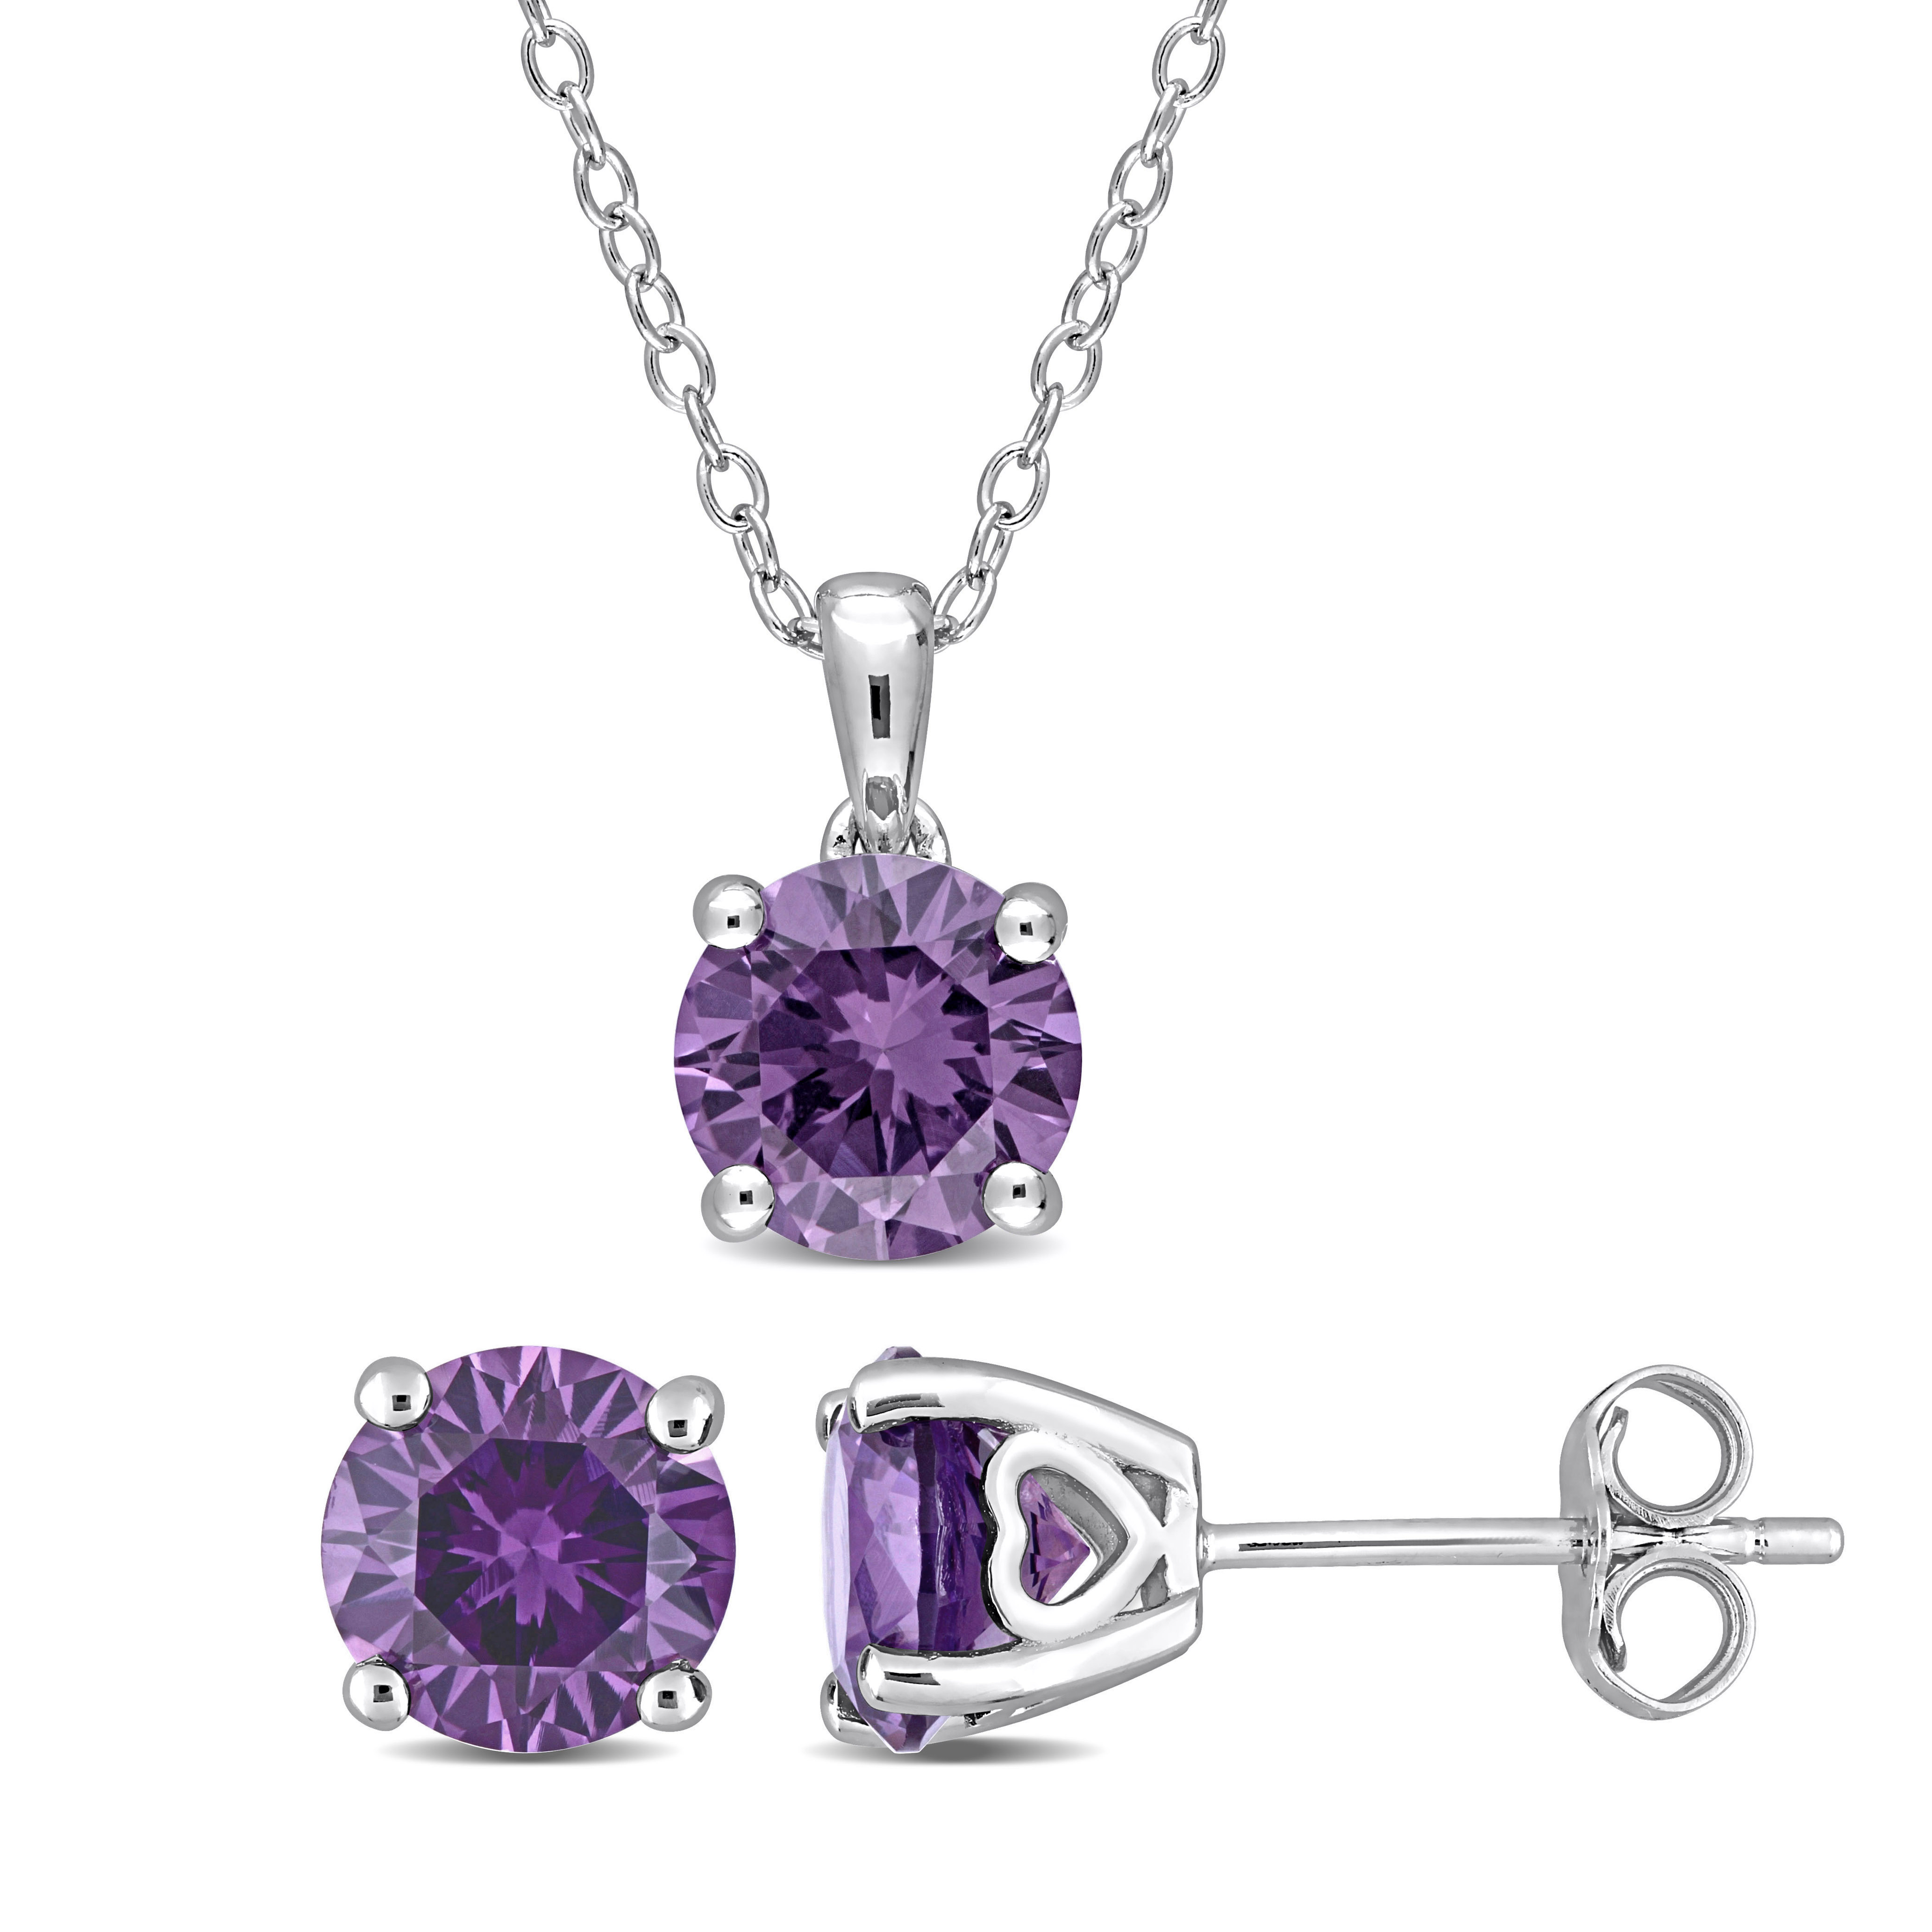 4 4/5 CT TGW Simulated Alexandrite Solitaire Stud Earring and Pendant with chain Set in Sterling Silver